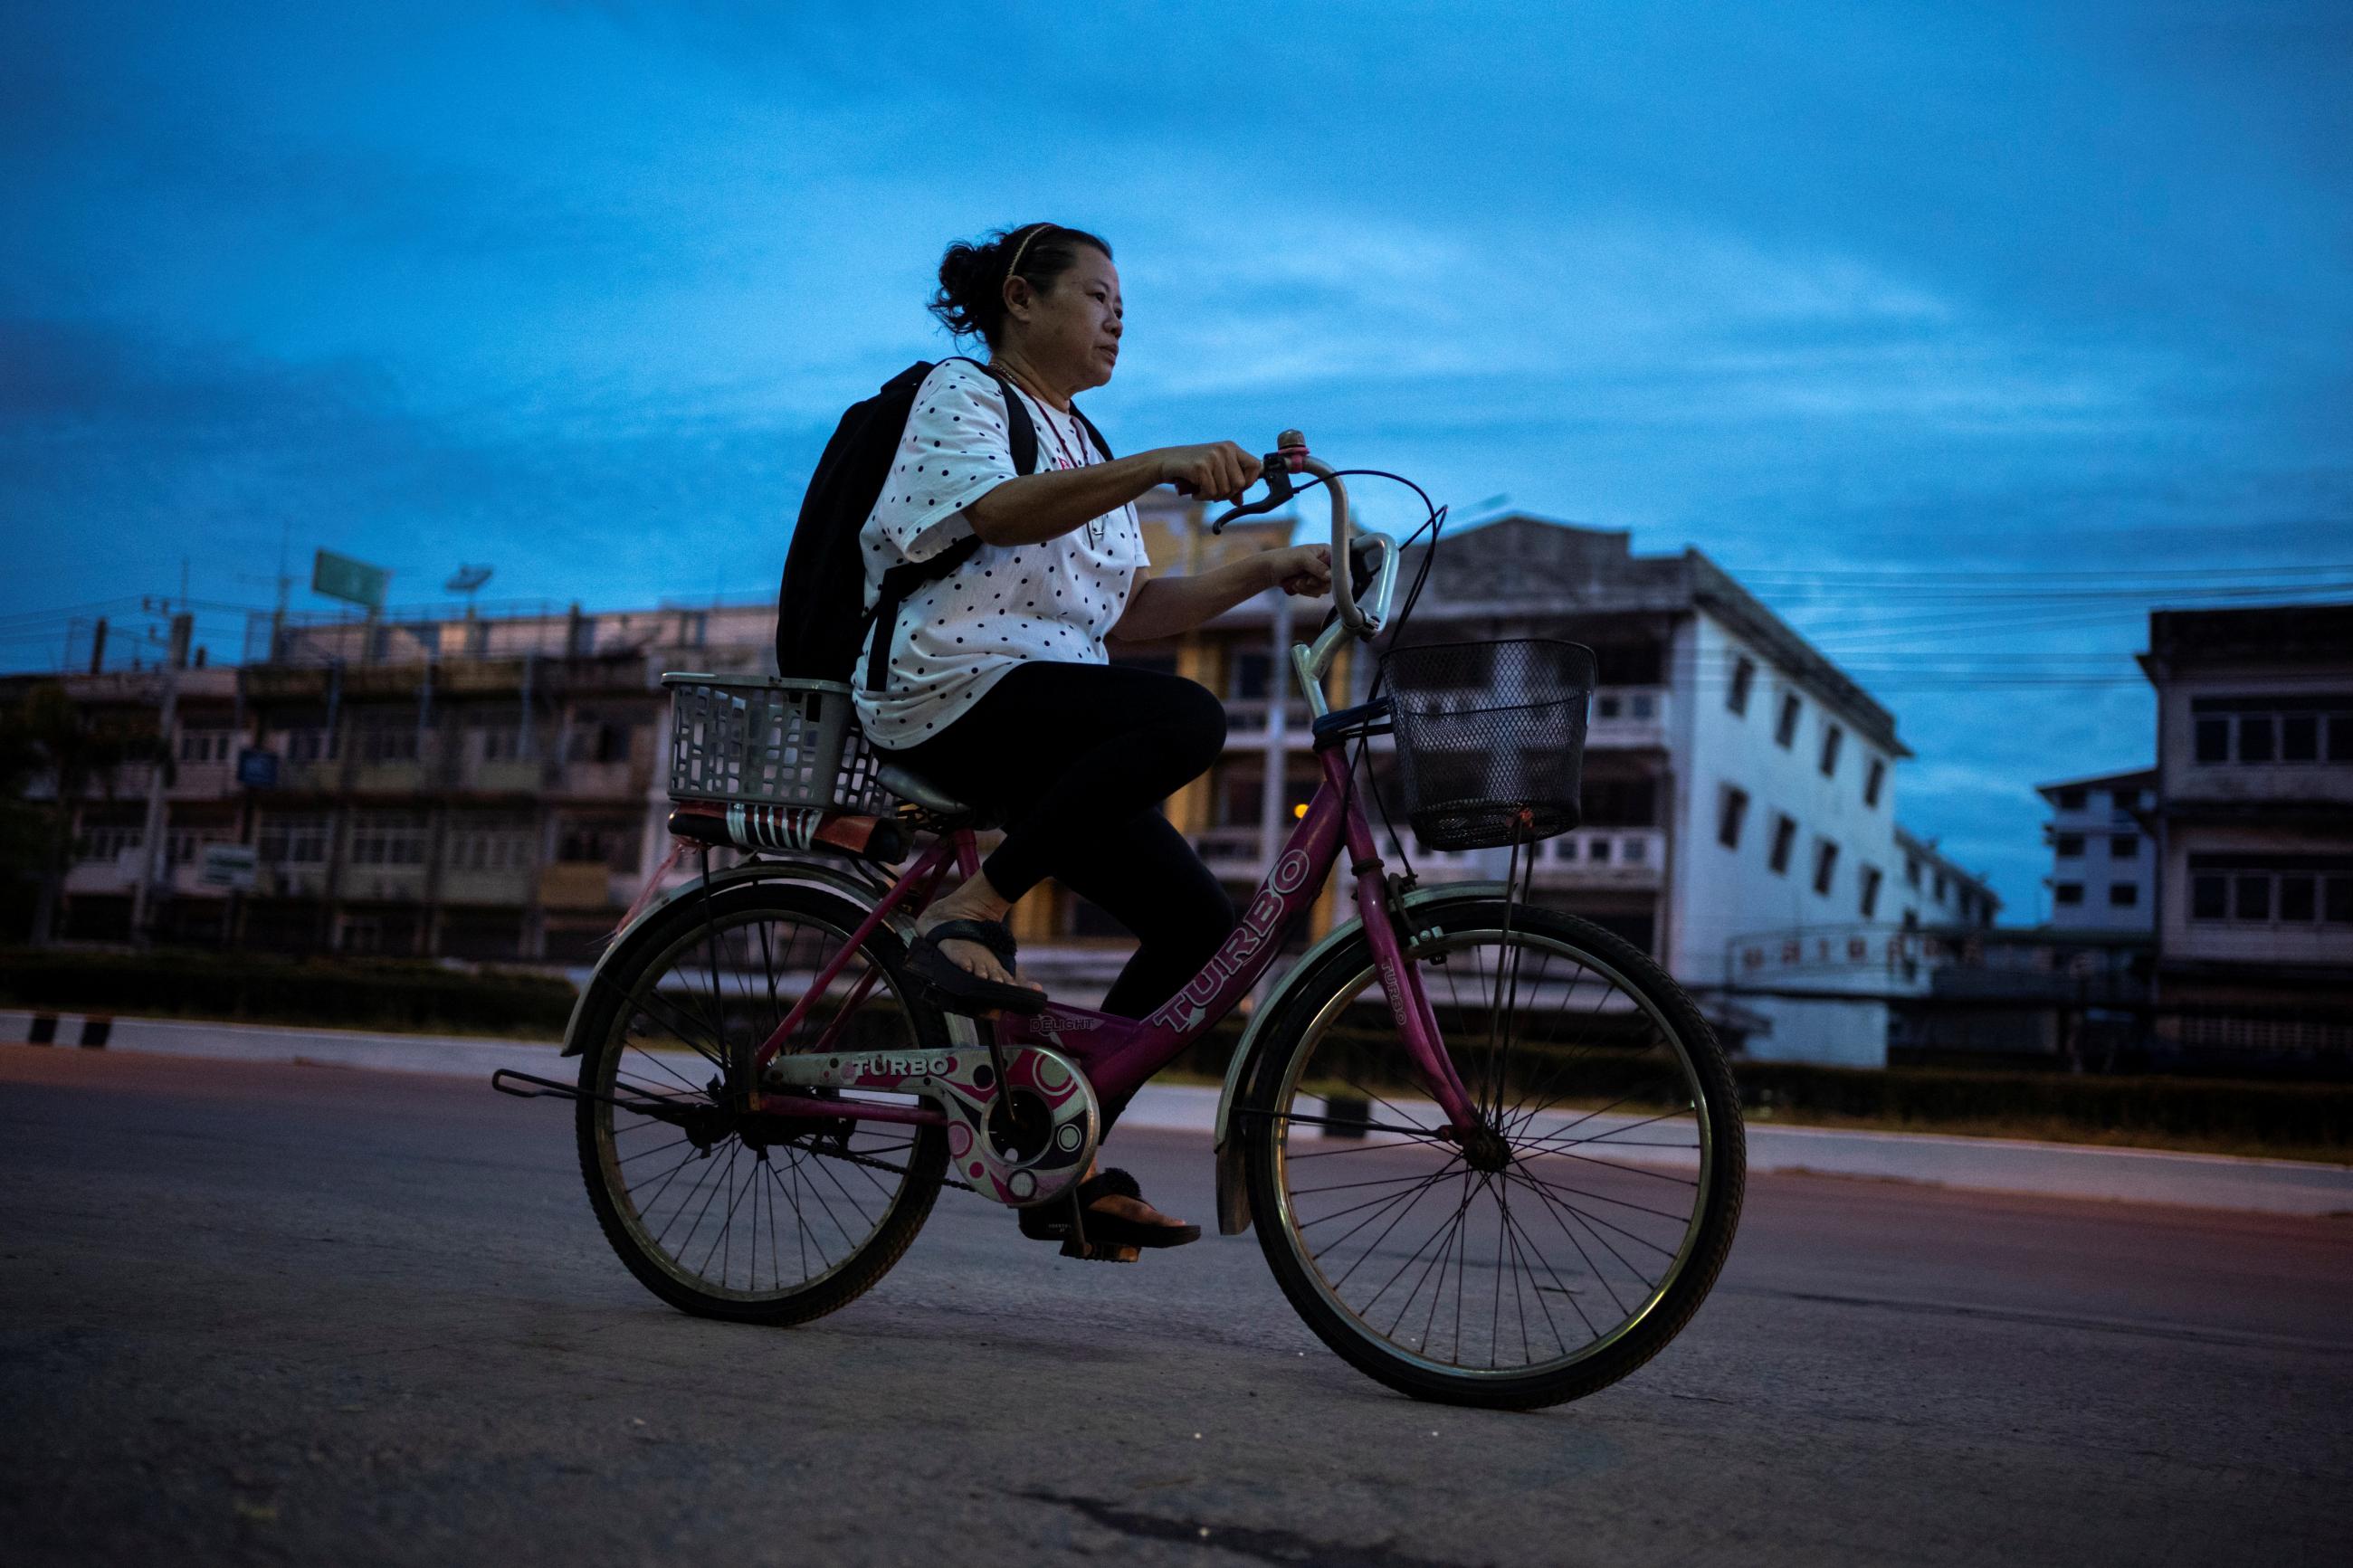 Unyakarn Booprasert, 59, who tried to take her own life in April 2020, cycles to a hospital appointment in Samut Sakhon province, Thailand, on May 29, 2020. 